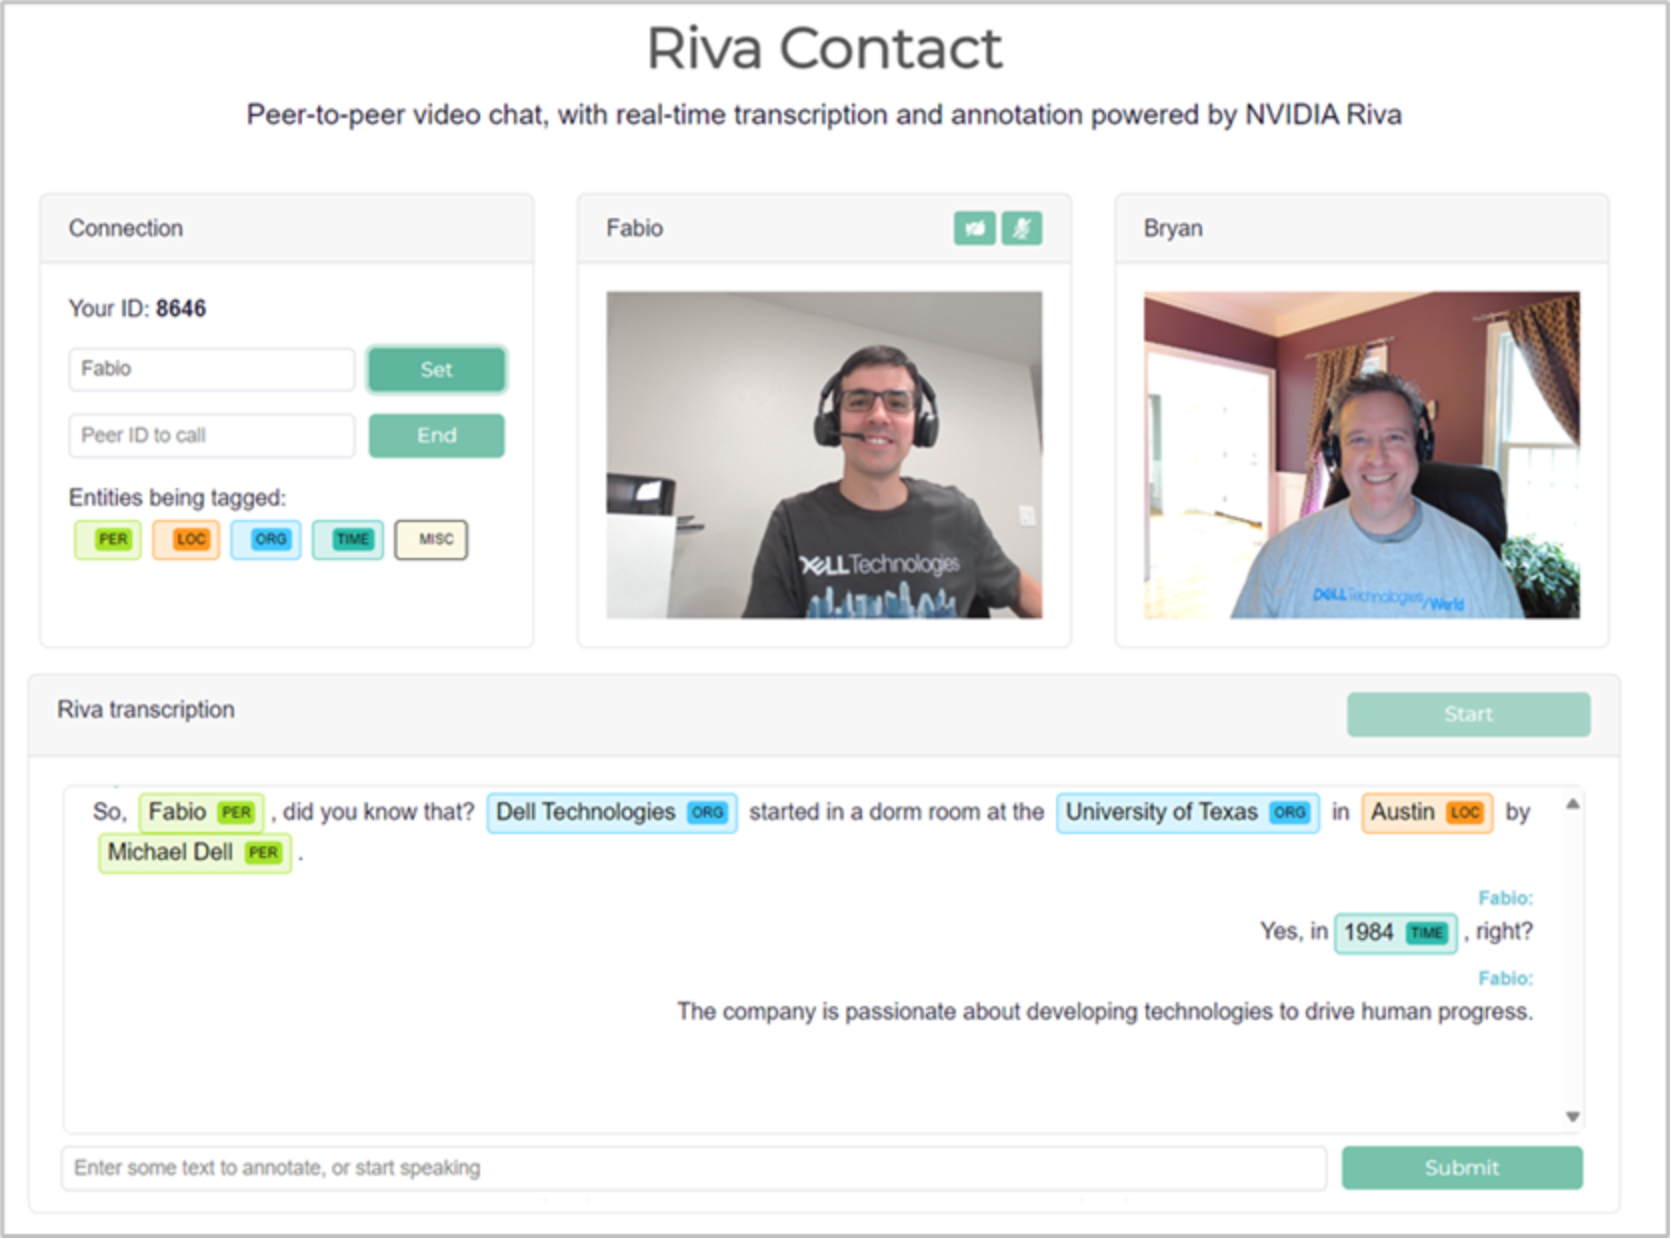 Screenshot of the Riva Contact web application demo showing the video of the two participants of the call and the transcription of their conversation.